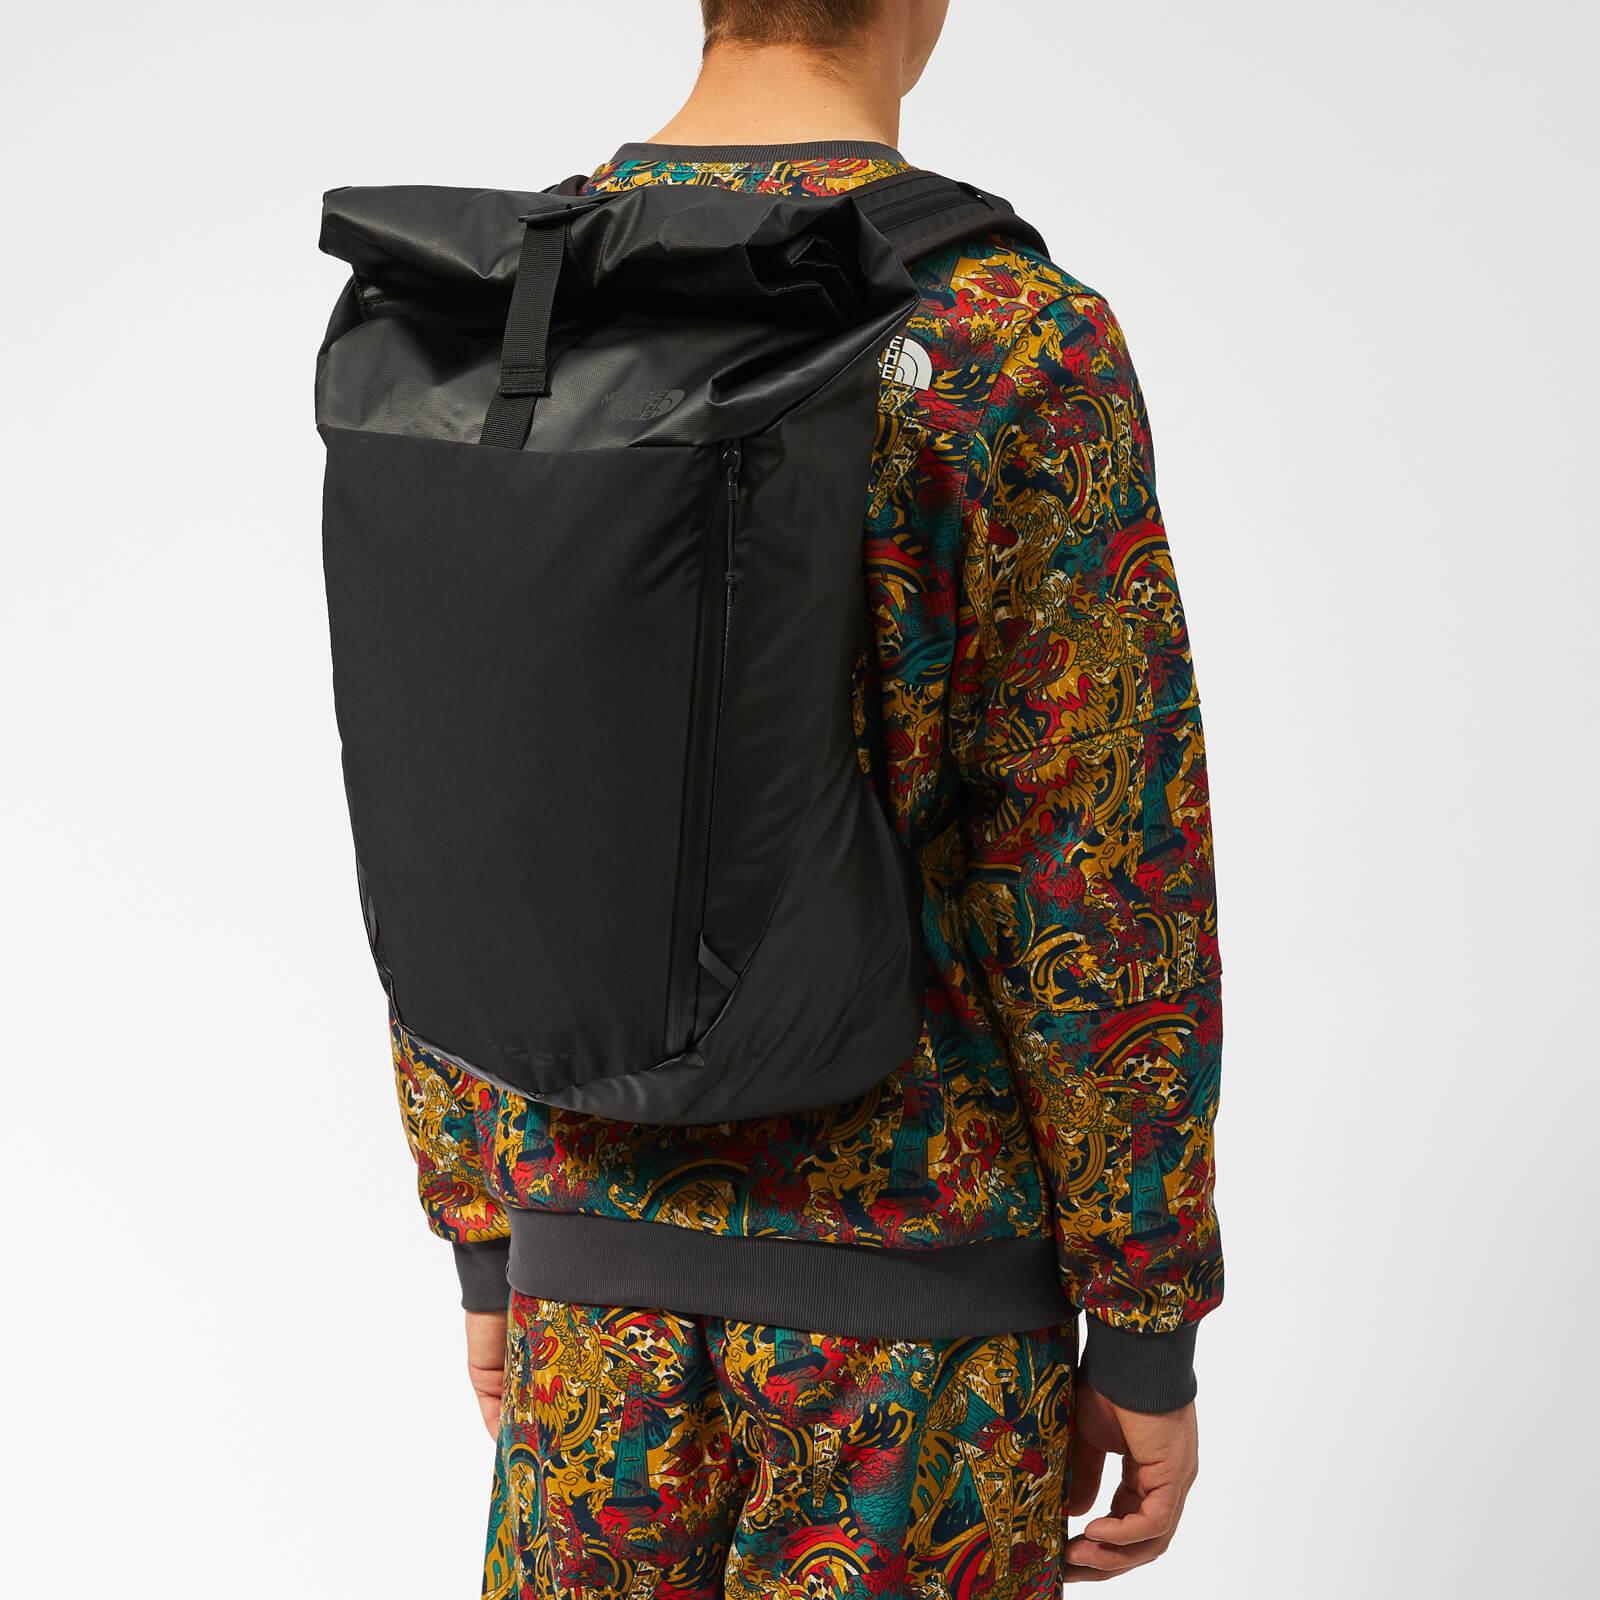 peckham backpack north face